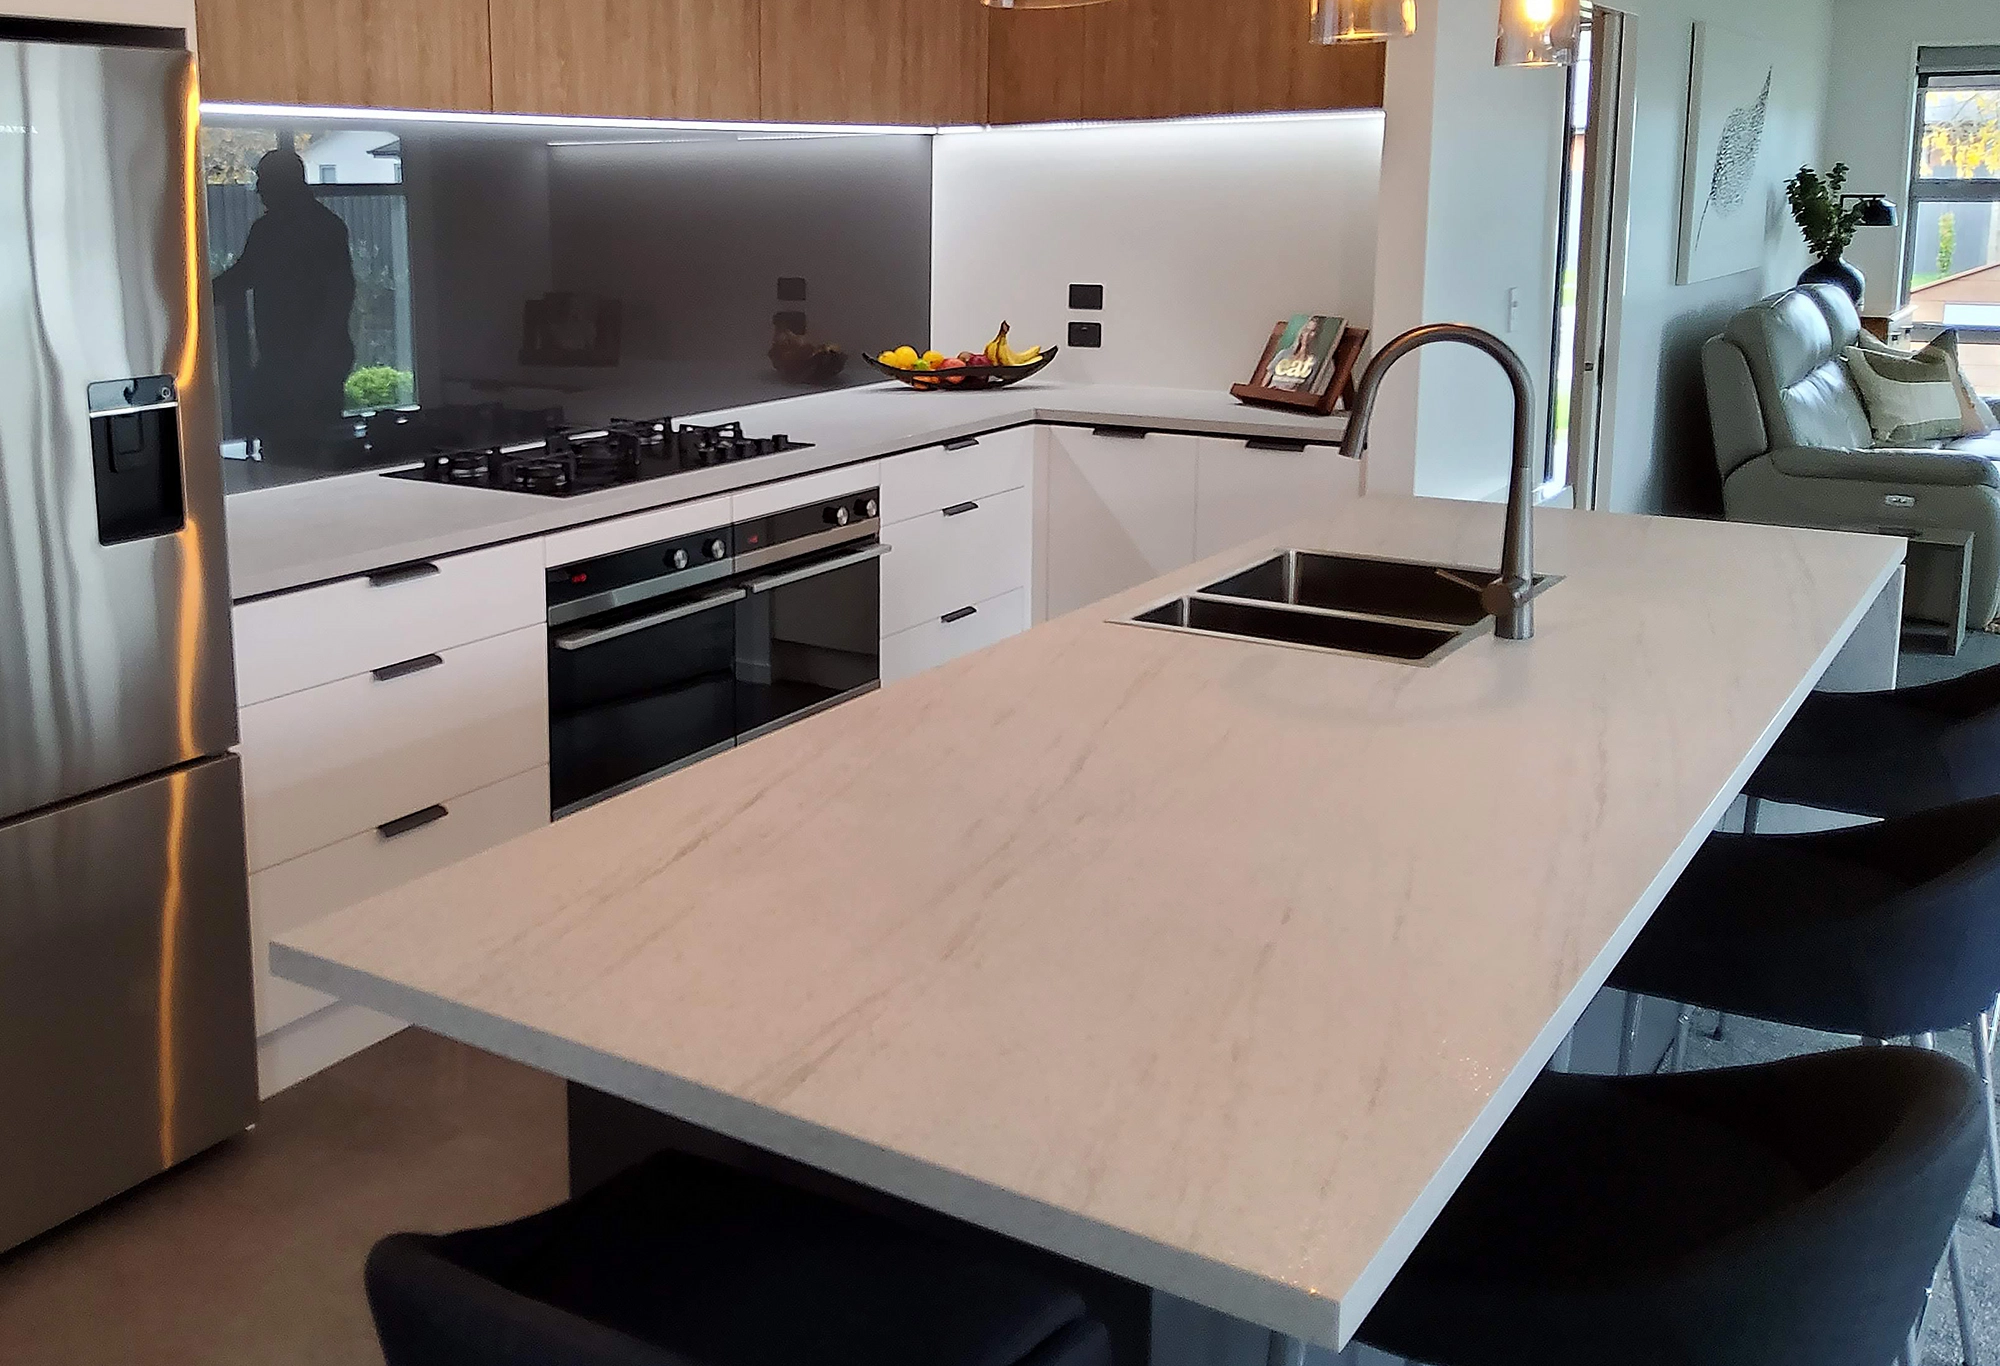 O'Brien Group Benchtops deliver to most of New Zealand